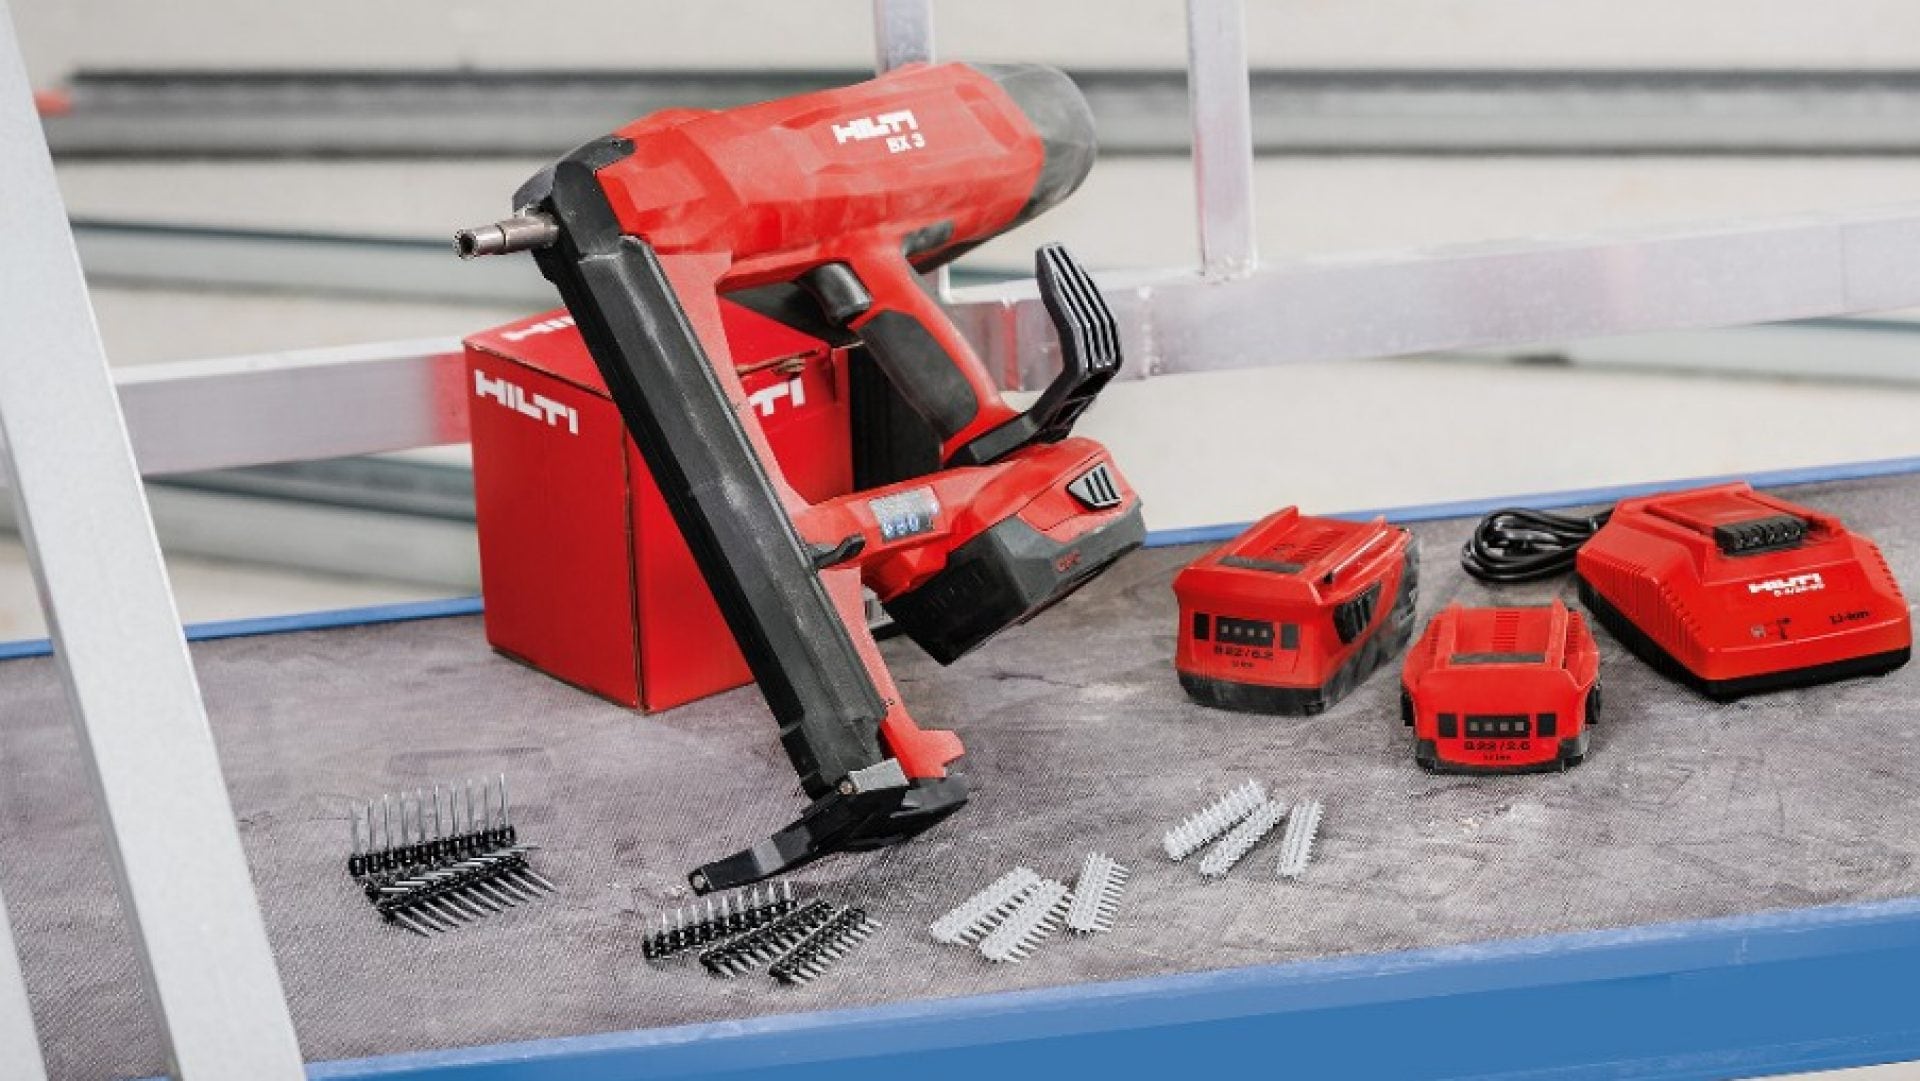 BX 3 is the cordless, battery-powered nailer designed for hassle-free fastenings to concrete